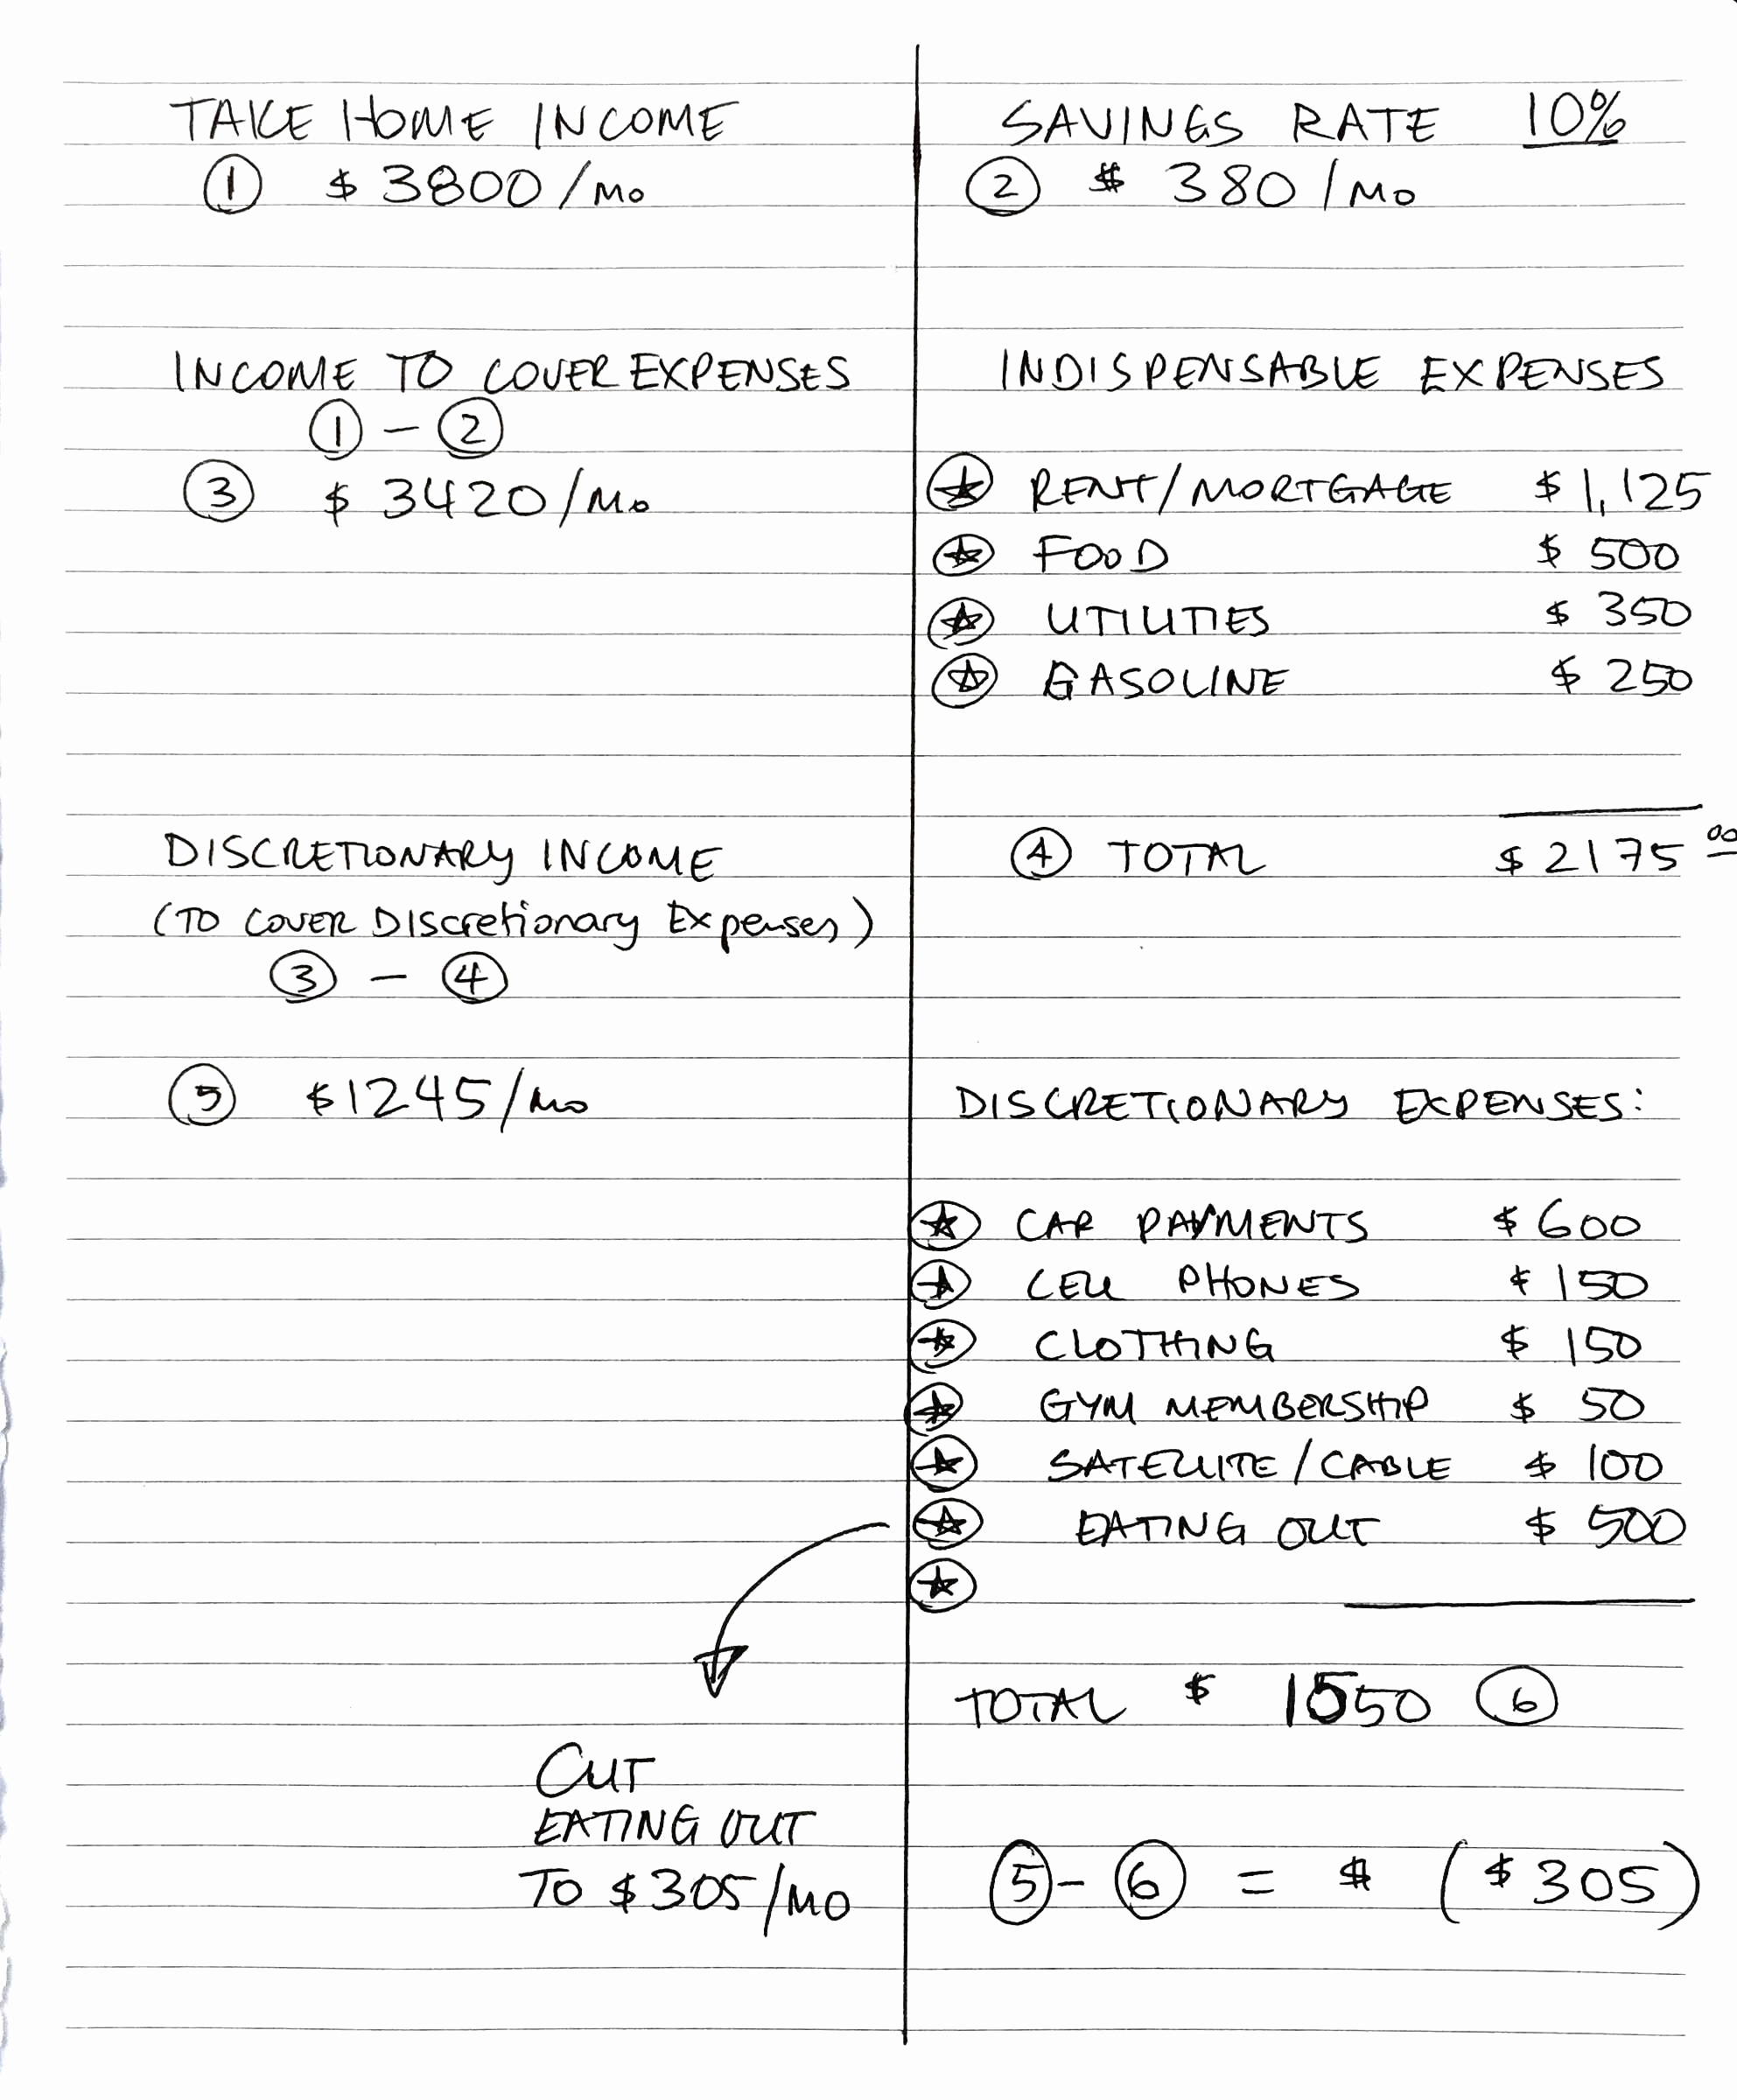 Equipment Lease Calculator Excel Spreadsheet Inside Equipment Lease Calculator Excel Spreadsheet – Spreadsheet Collections